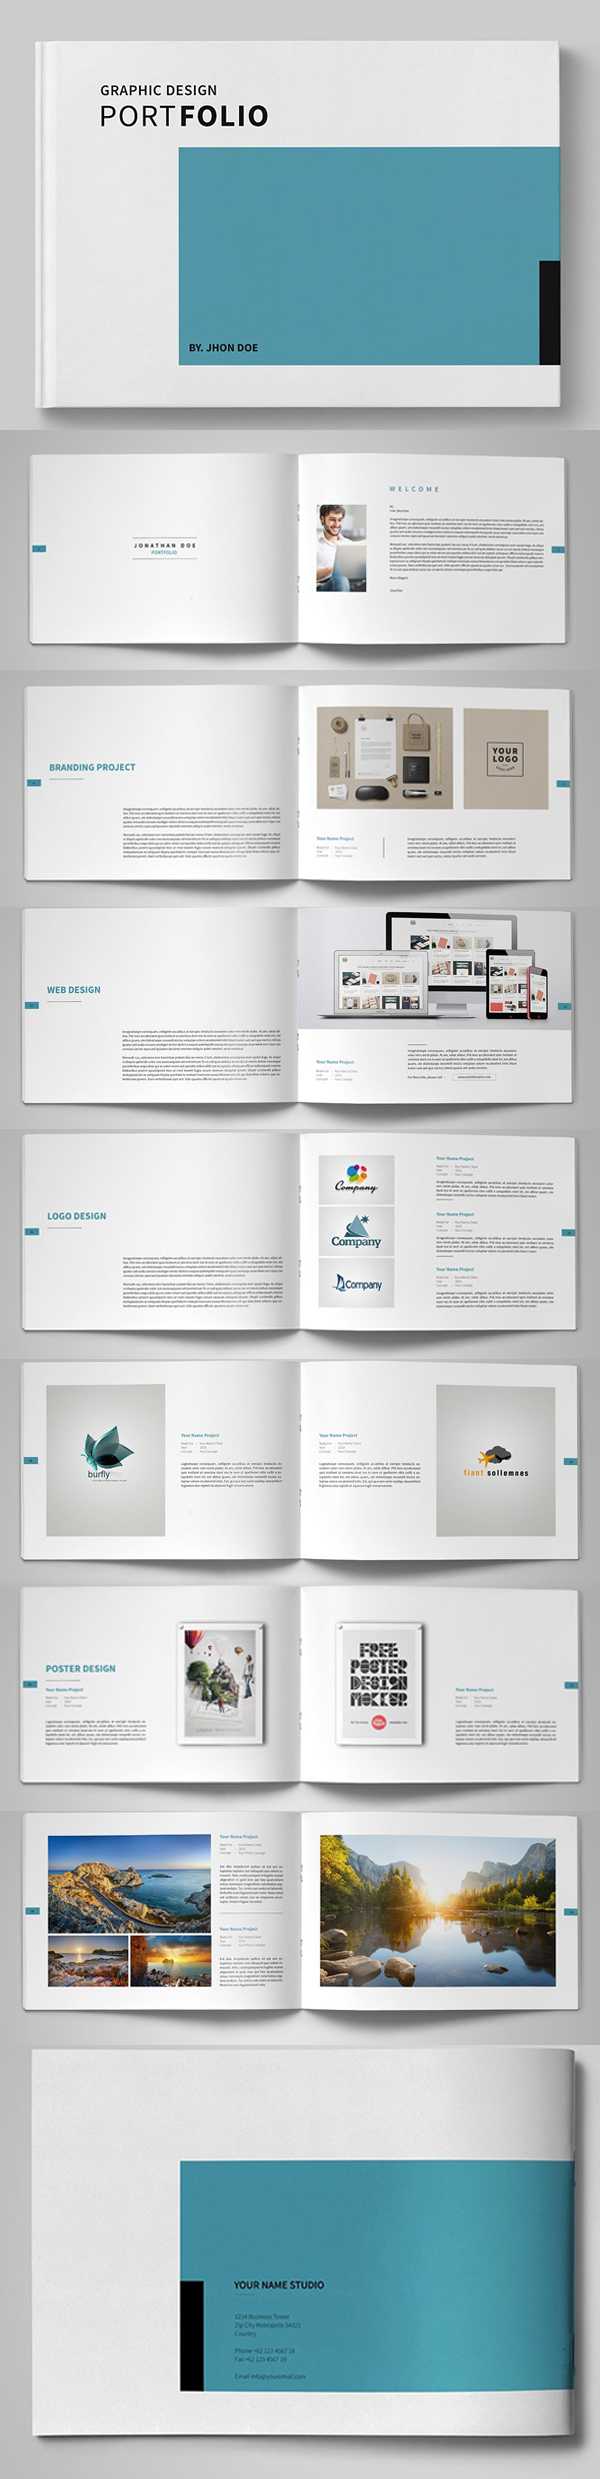 20 New Professional Catalog Brochure Templates | Design With Regard To Product Brochure Template Free